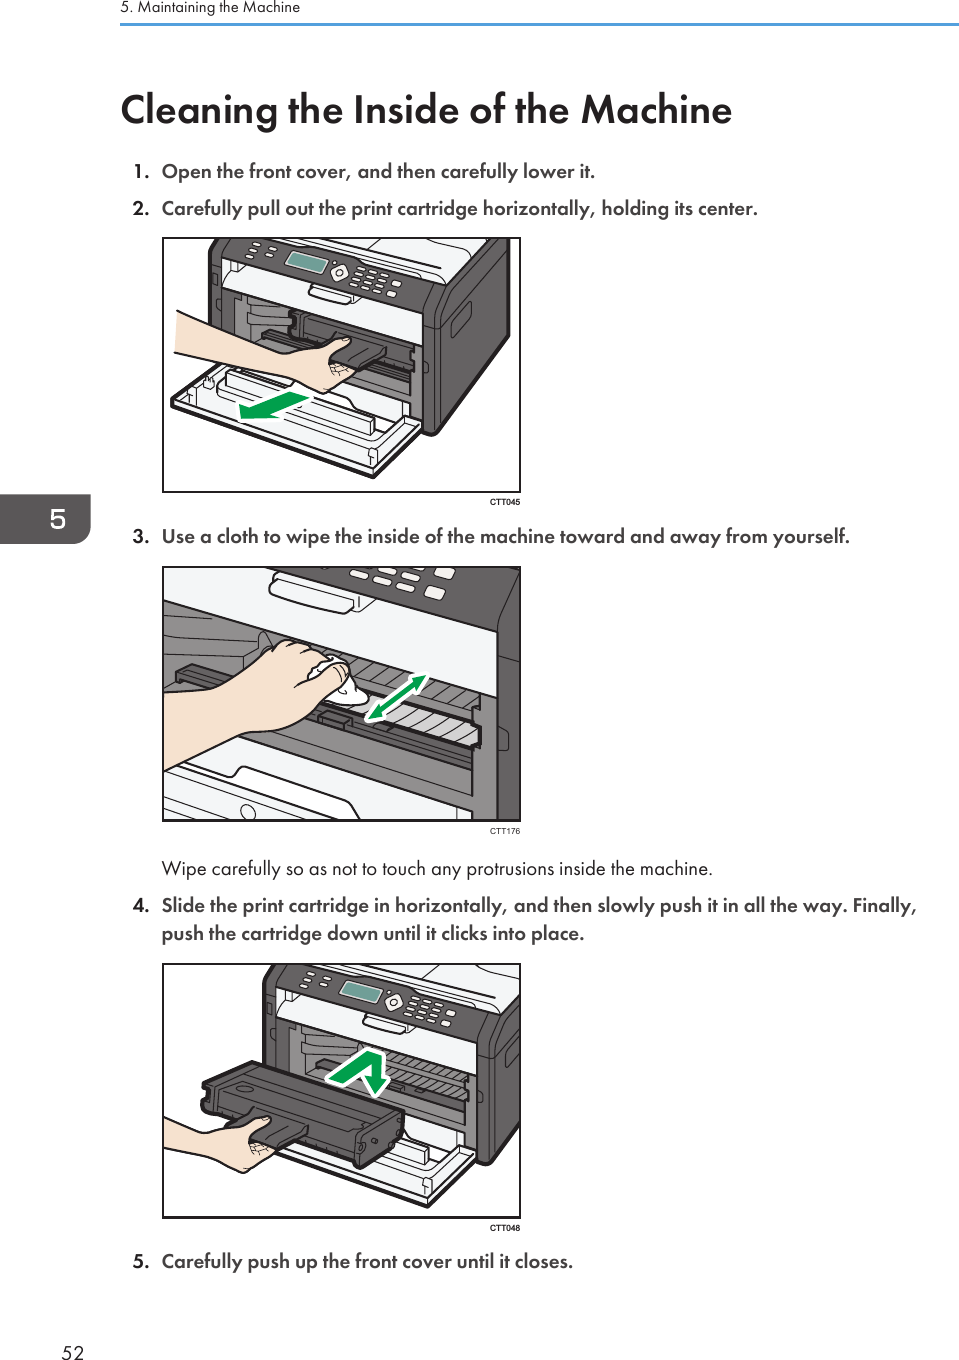 Cleaning the Inside of the Machine1. Open the front cover, and then carefully lower it.2. Carefully pull out the print cartridge horizontally, holding its center.CTT0453. Use a cloth to wipe the inside of the machine toward and away from yourself.CTT176Wipe carefully so as not to touch any protrusions inside the machine.4. Slide the print cartridge in horizontally, and then slowly push it in all the way. Finally,push the cartridge down until it clicks into place.CTT0485. Carefully push up the front cover until it closes.5. Maintaining the Machine52